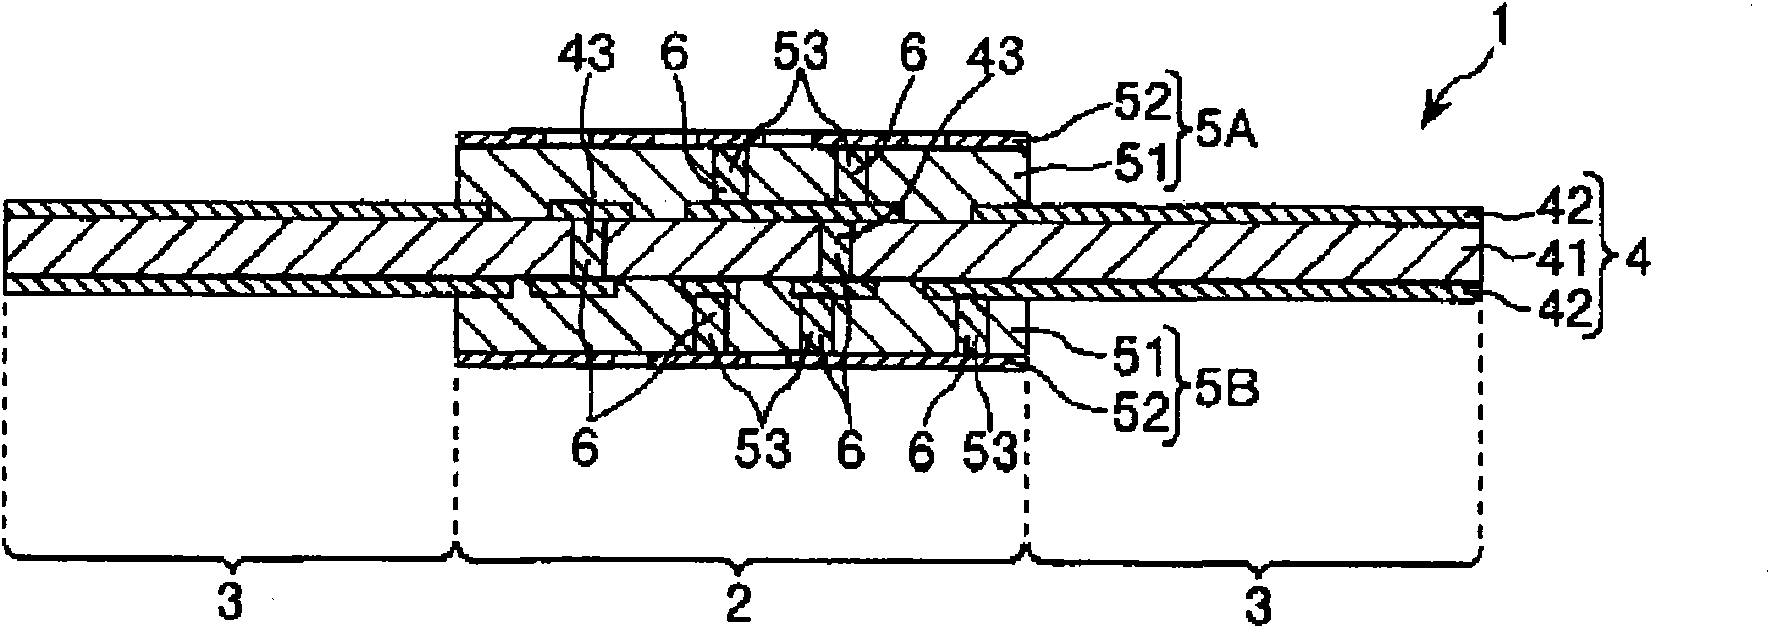 Multilayered wiring board and semiconductor device